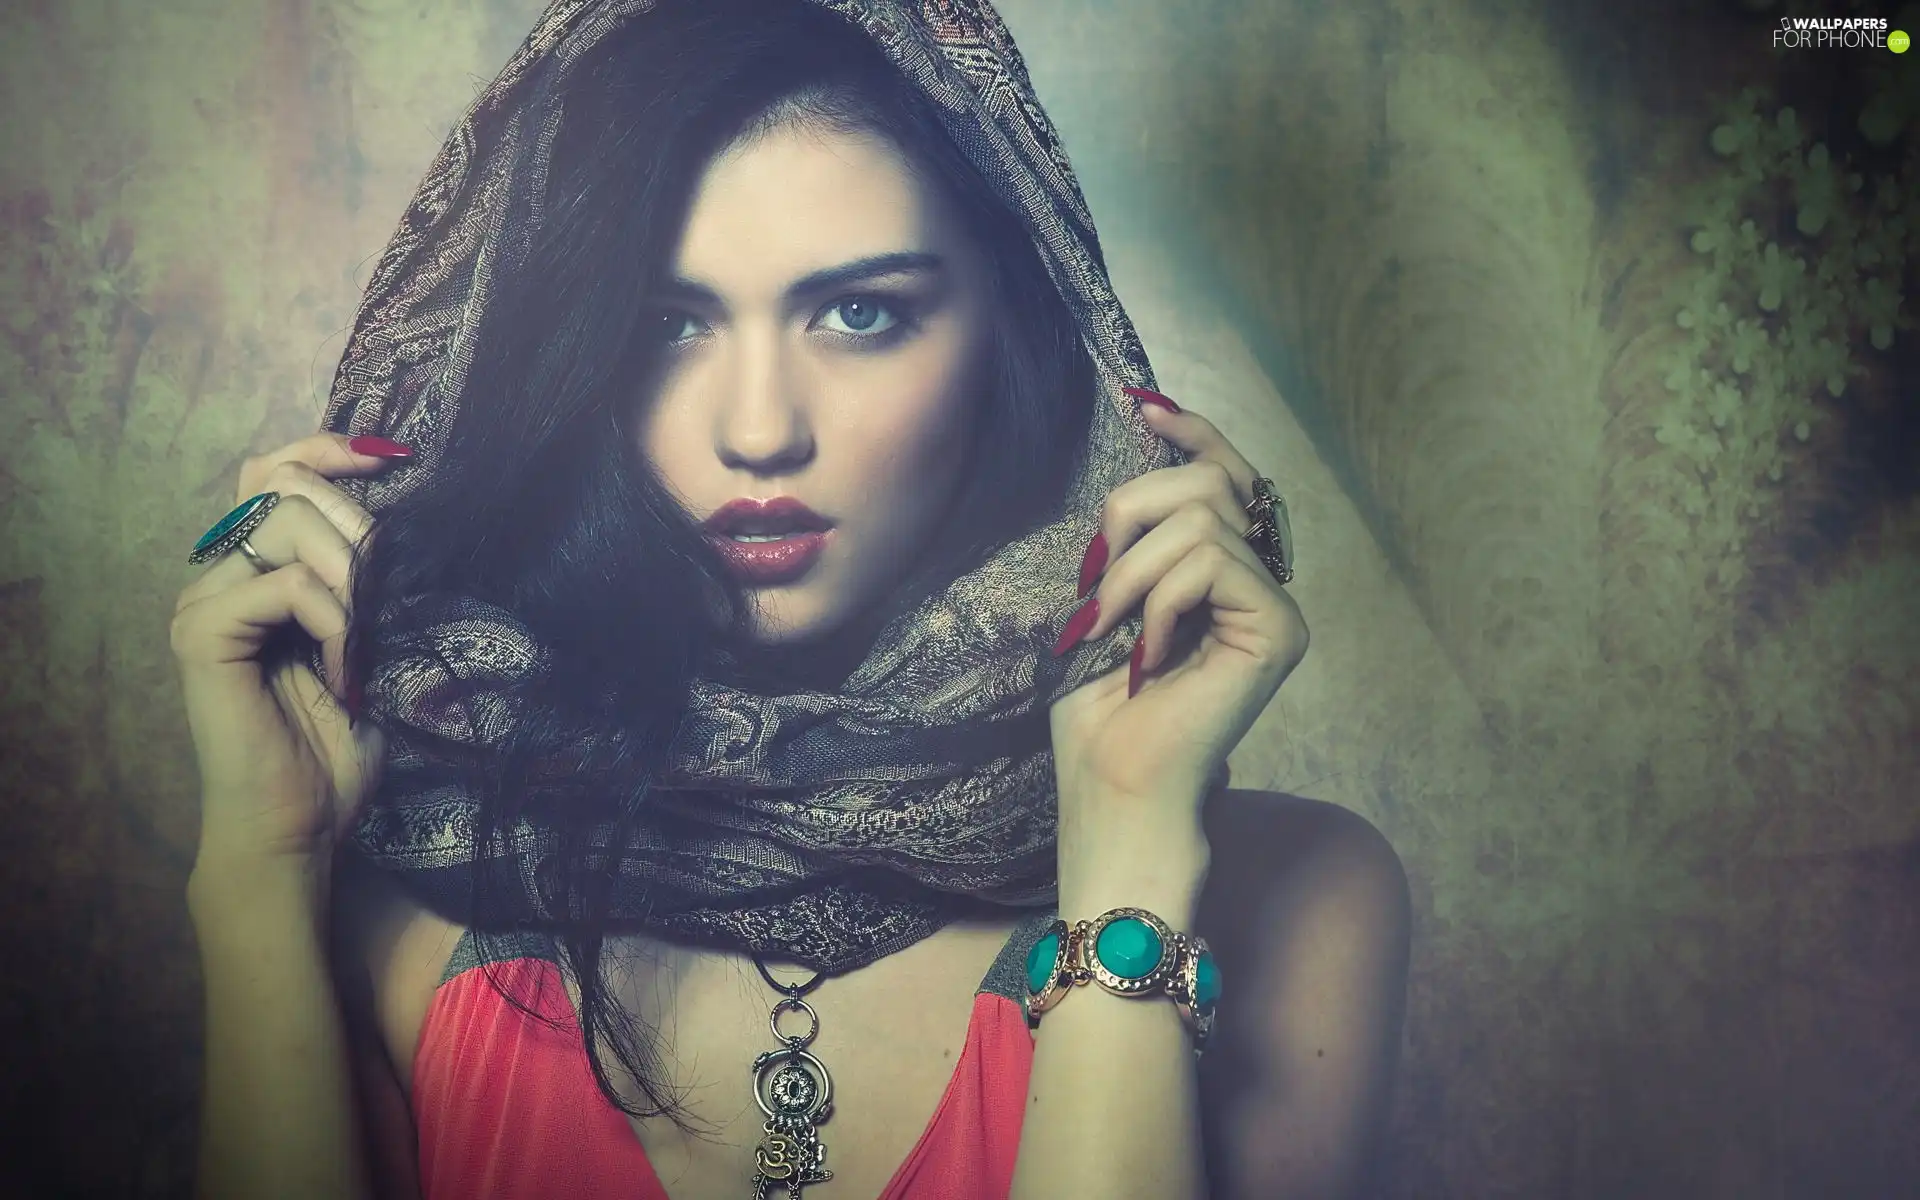 jewellery, shawl, girl, make-up, Mysterious